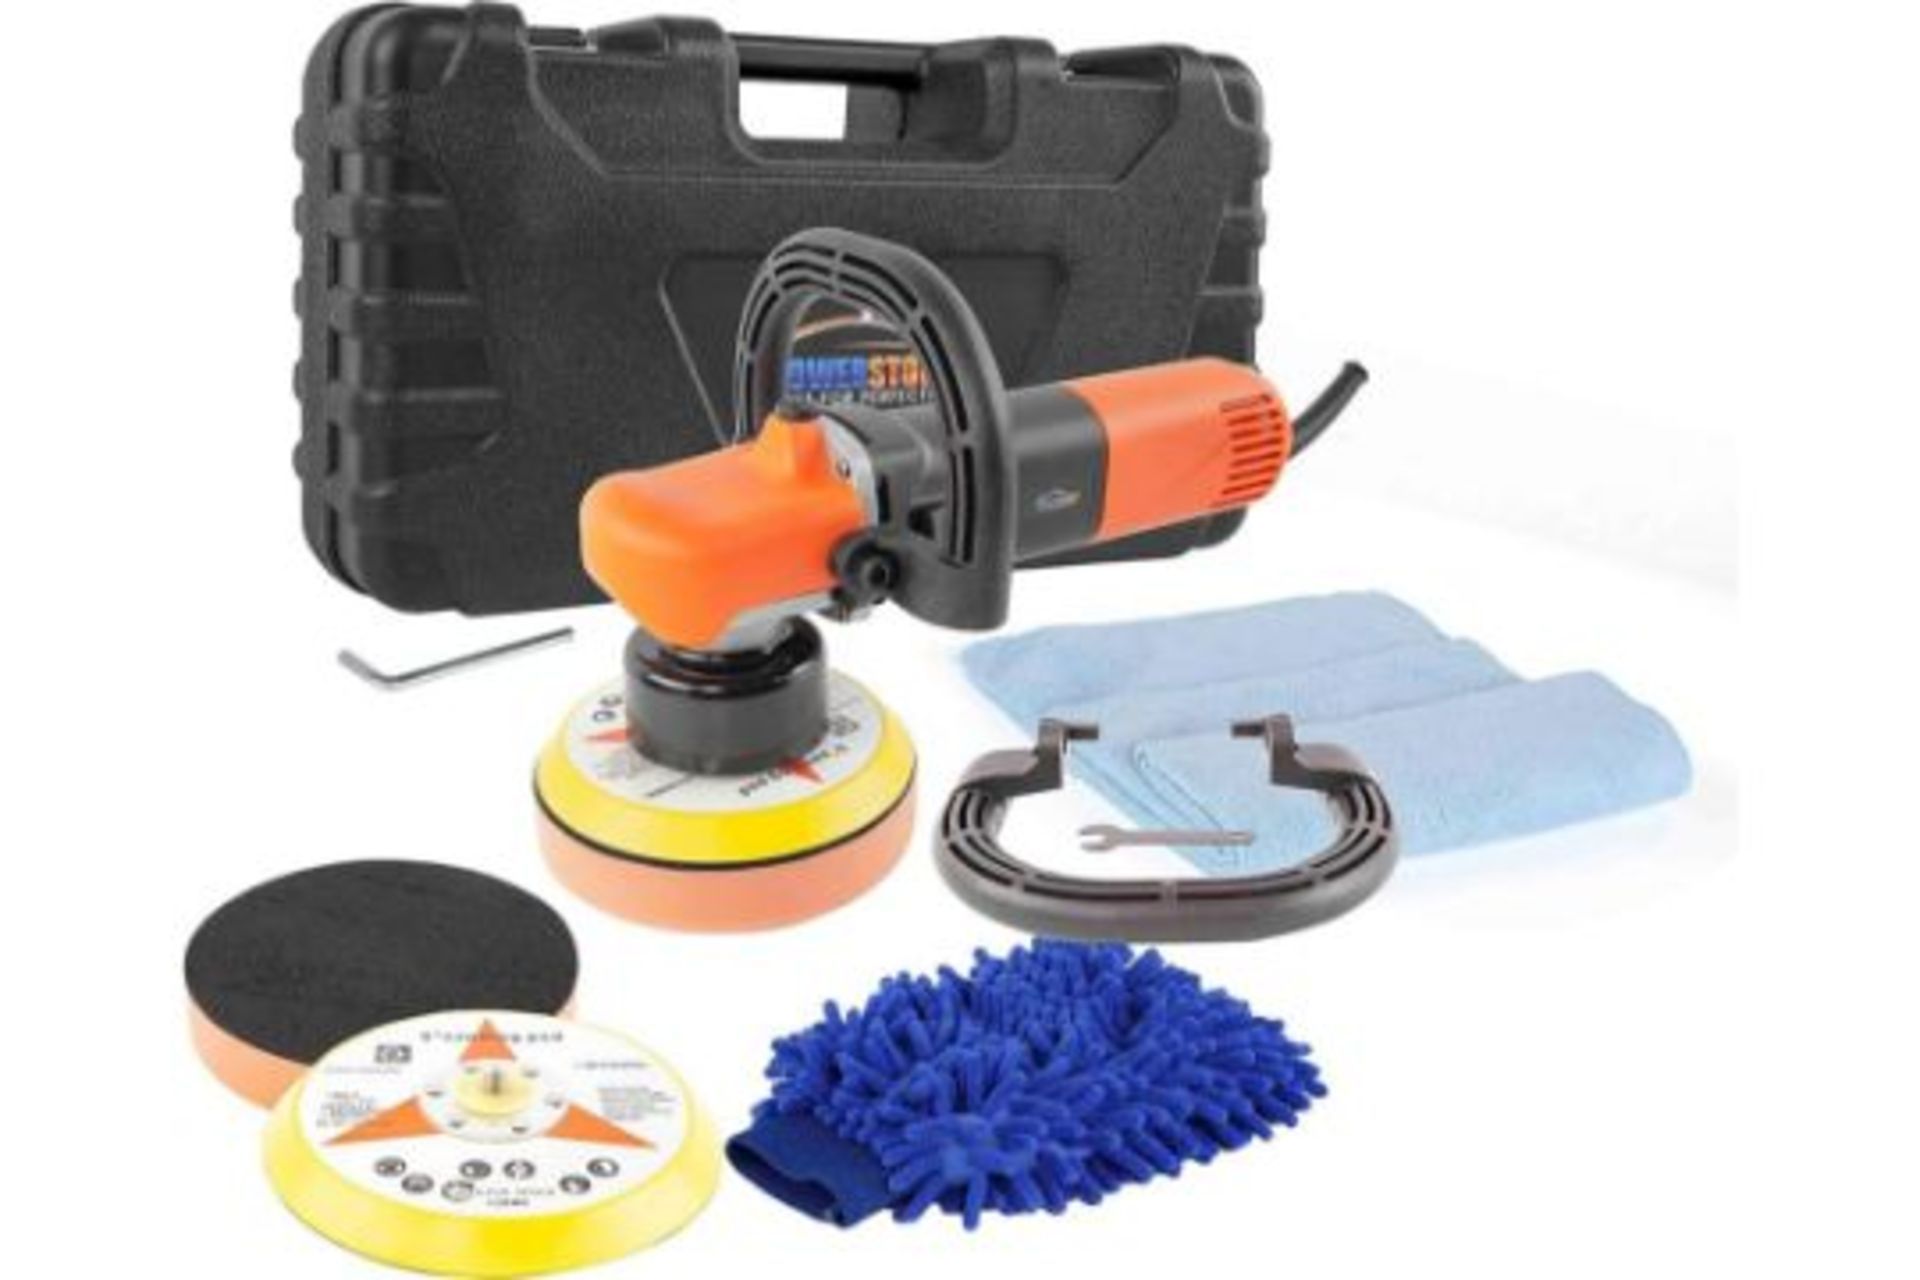 NEW & PACKAGED Powerstorm® Ultra Max Dual Action Car Polisher with 8mm Throw. CAPABLE AND SAFE ON